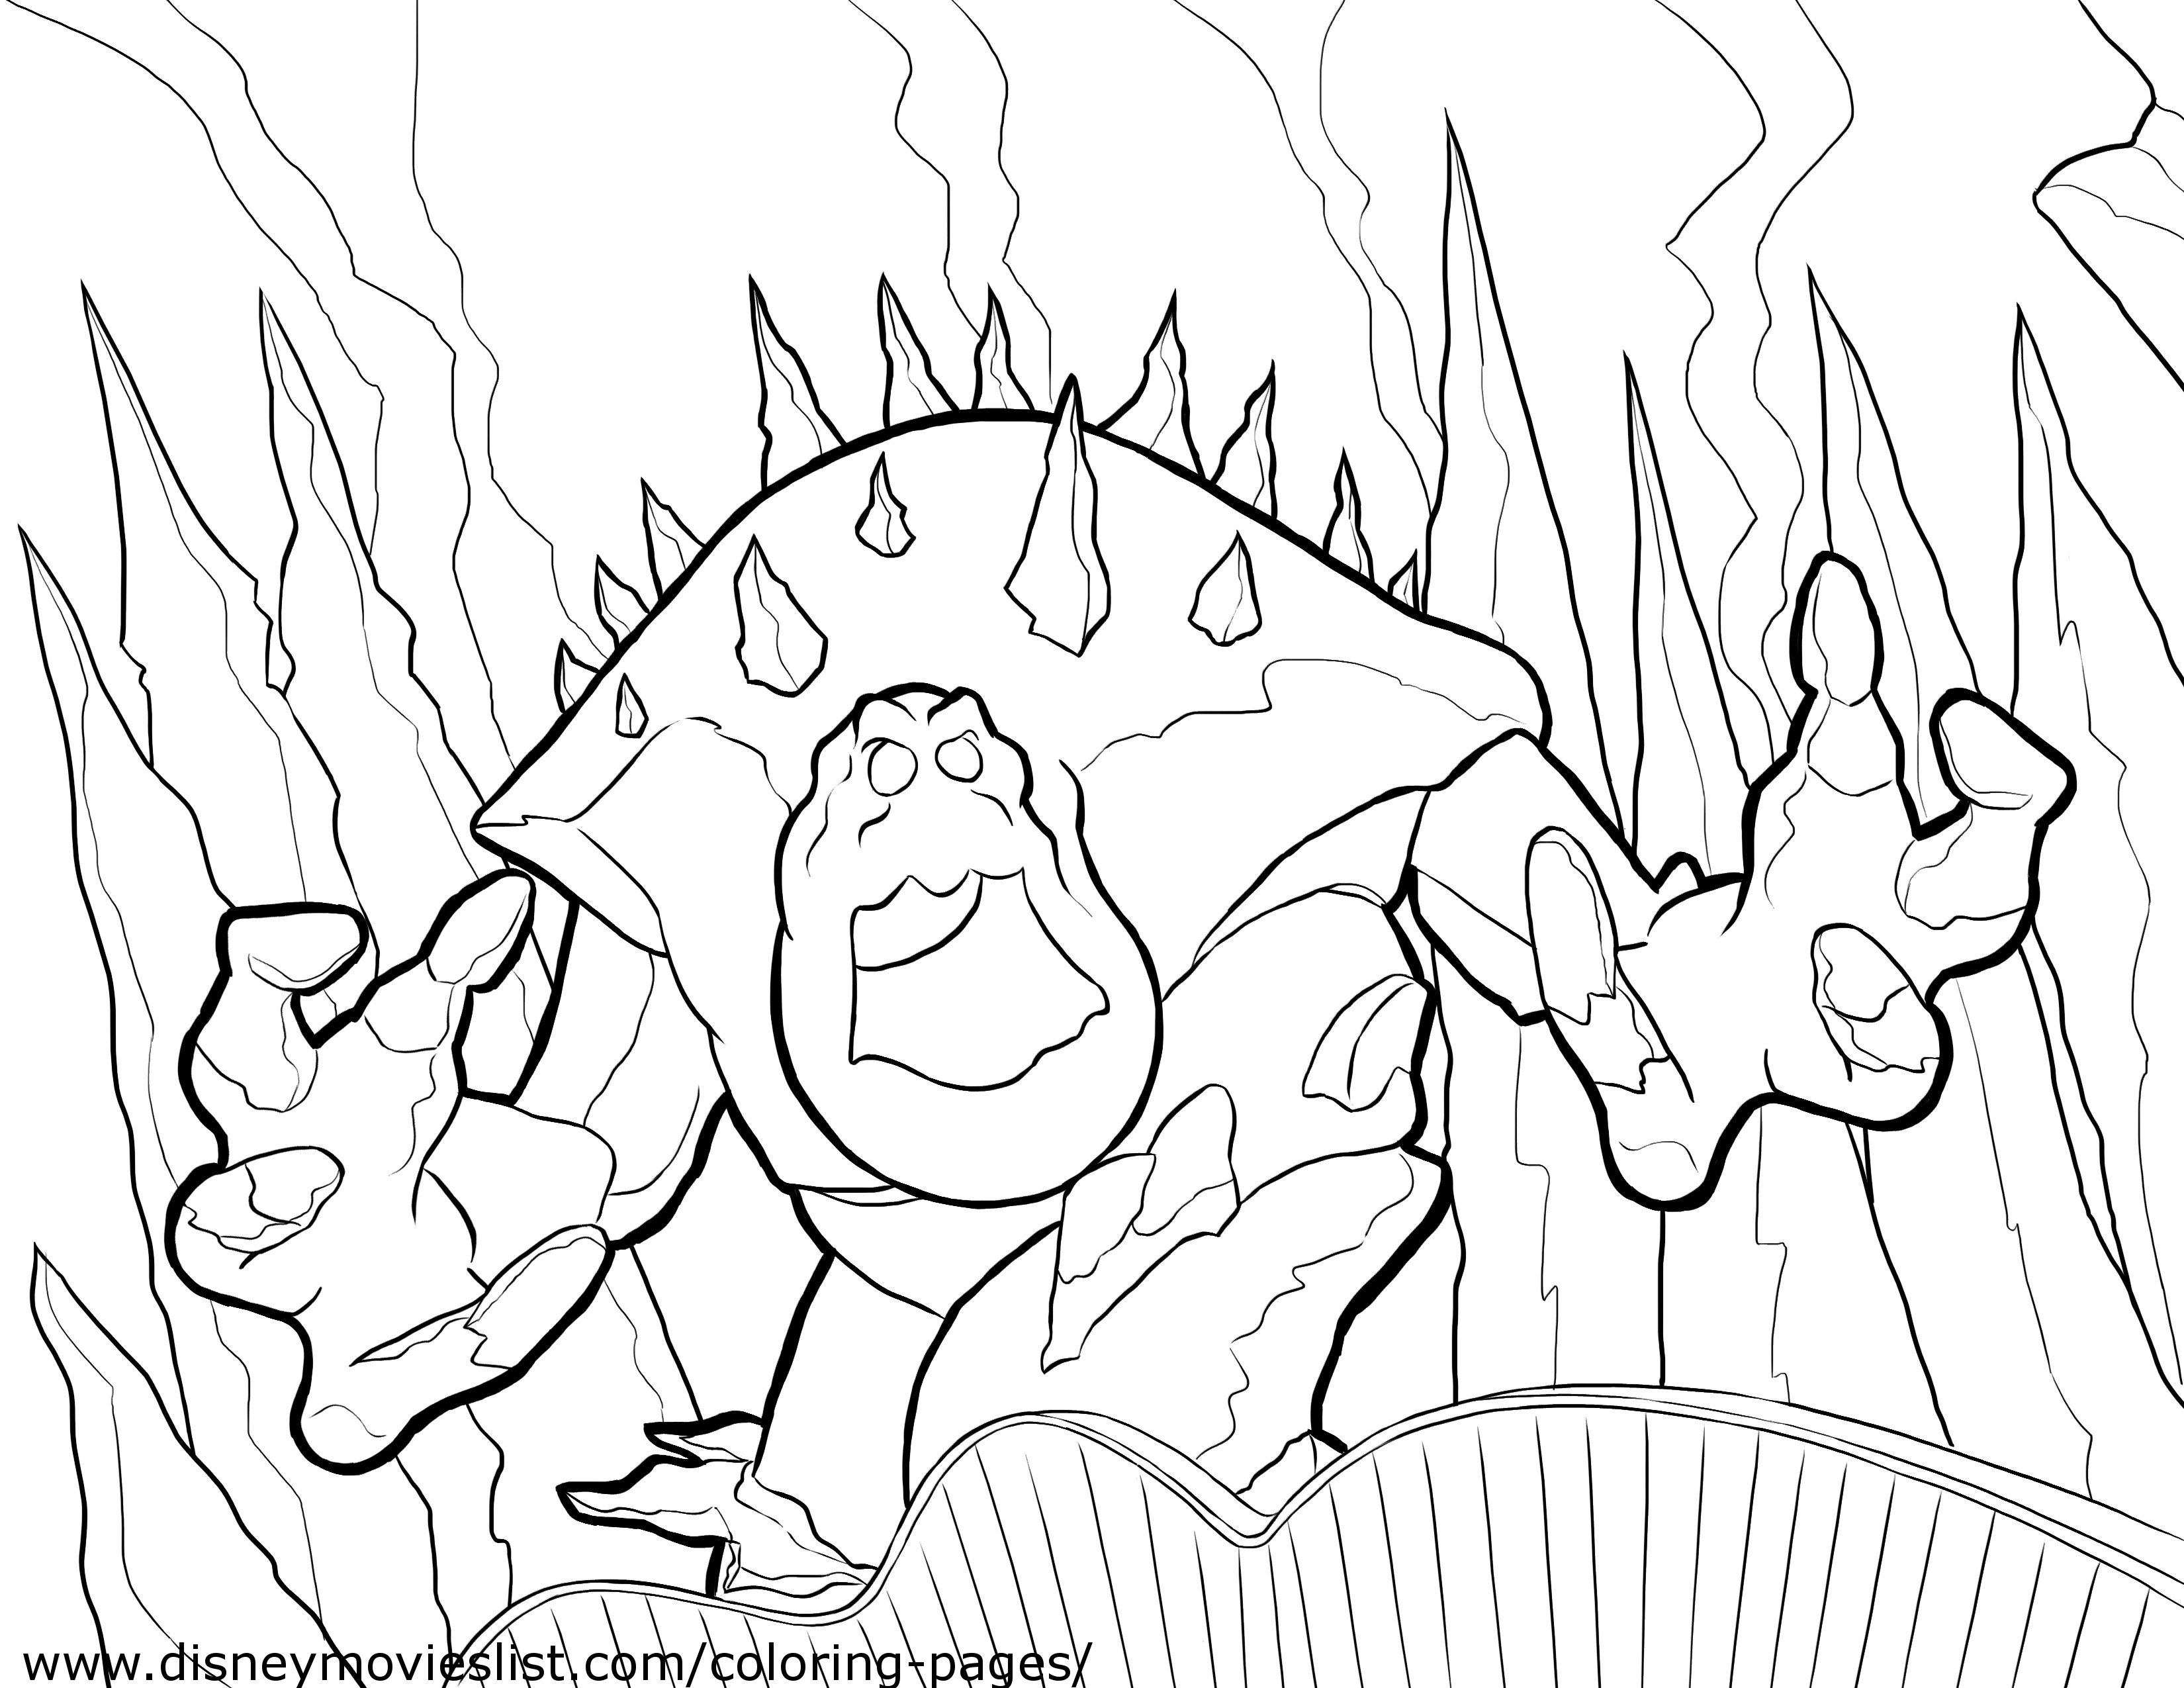 Frozen Coloring-Pages | Color pages | FREE coloring pages for kids |Printable coloring pages for kids| #21